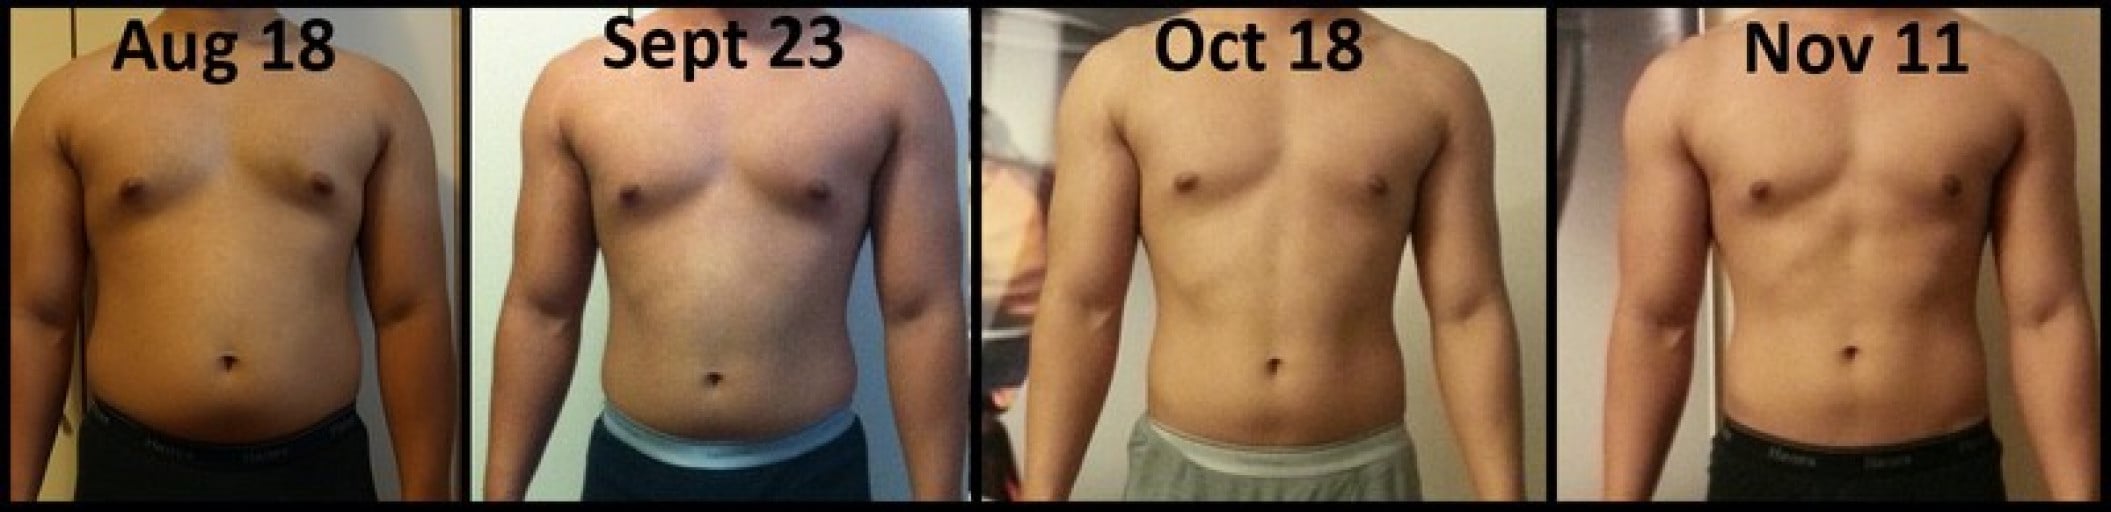 13 Pictures of a 140 lbs 5 foot 4 Male Weight Snapshot